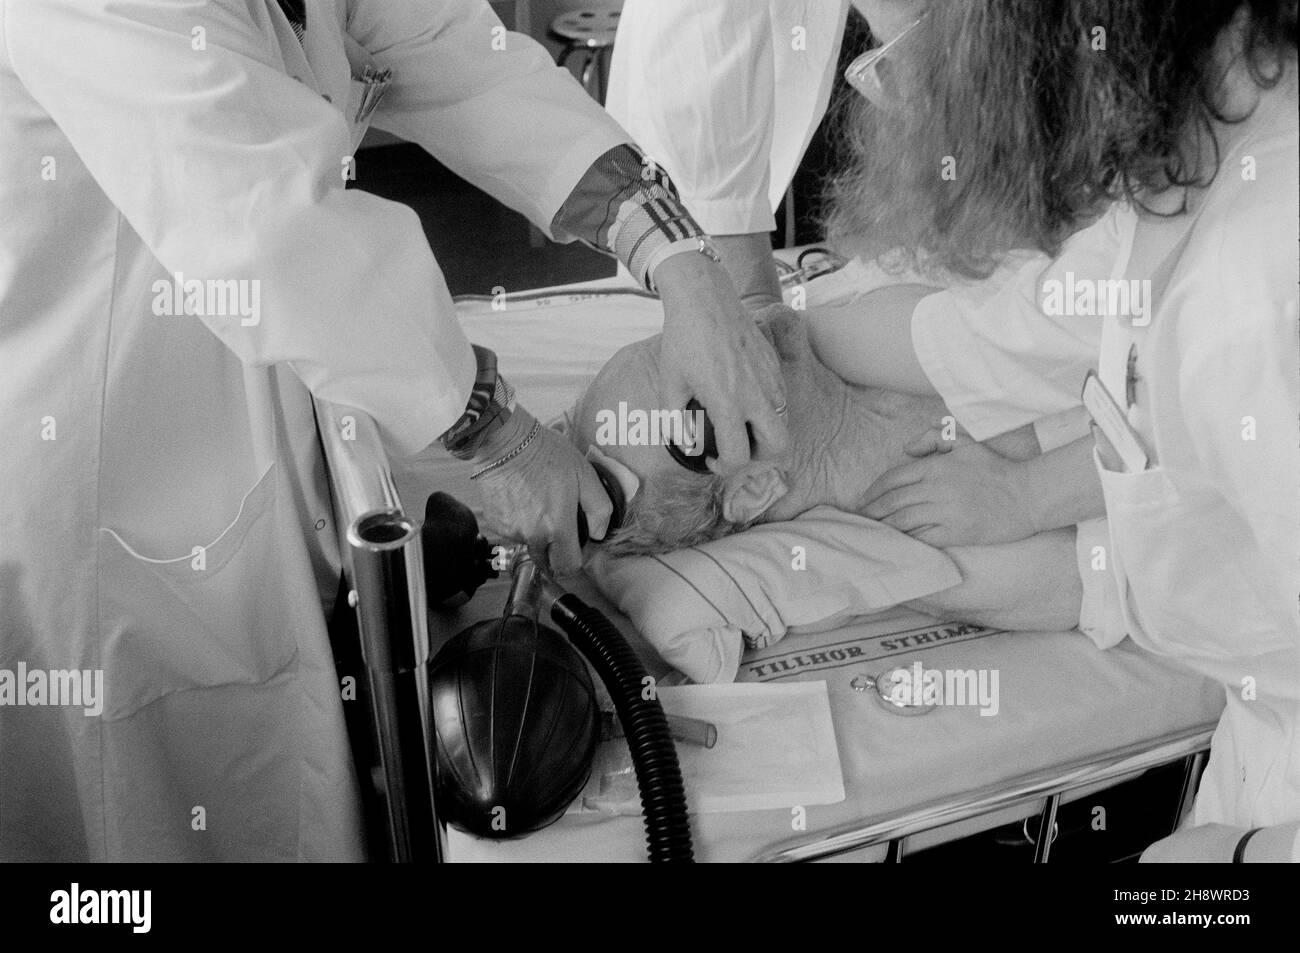 Old man receiving electroconvulsive therapy at mental hospital Beckomberga sjukhus in Bromma, Stockholm, Sweden. Photo taken during the 1980s, with a nurse holding the patient and a doctor applying the ECT pedals to the old mans head. Stock Photo